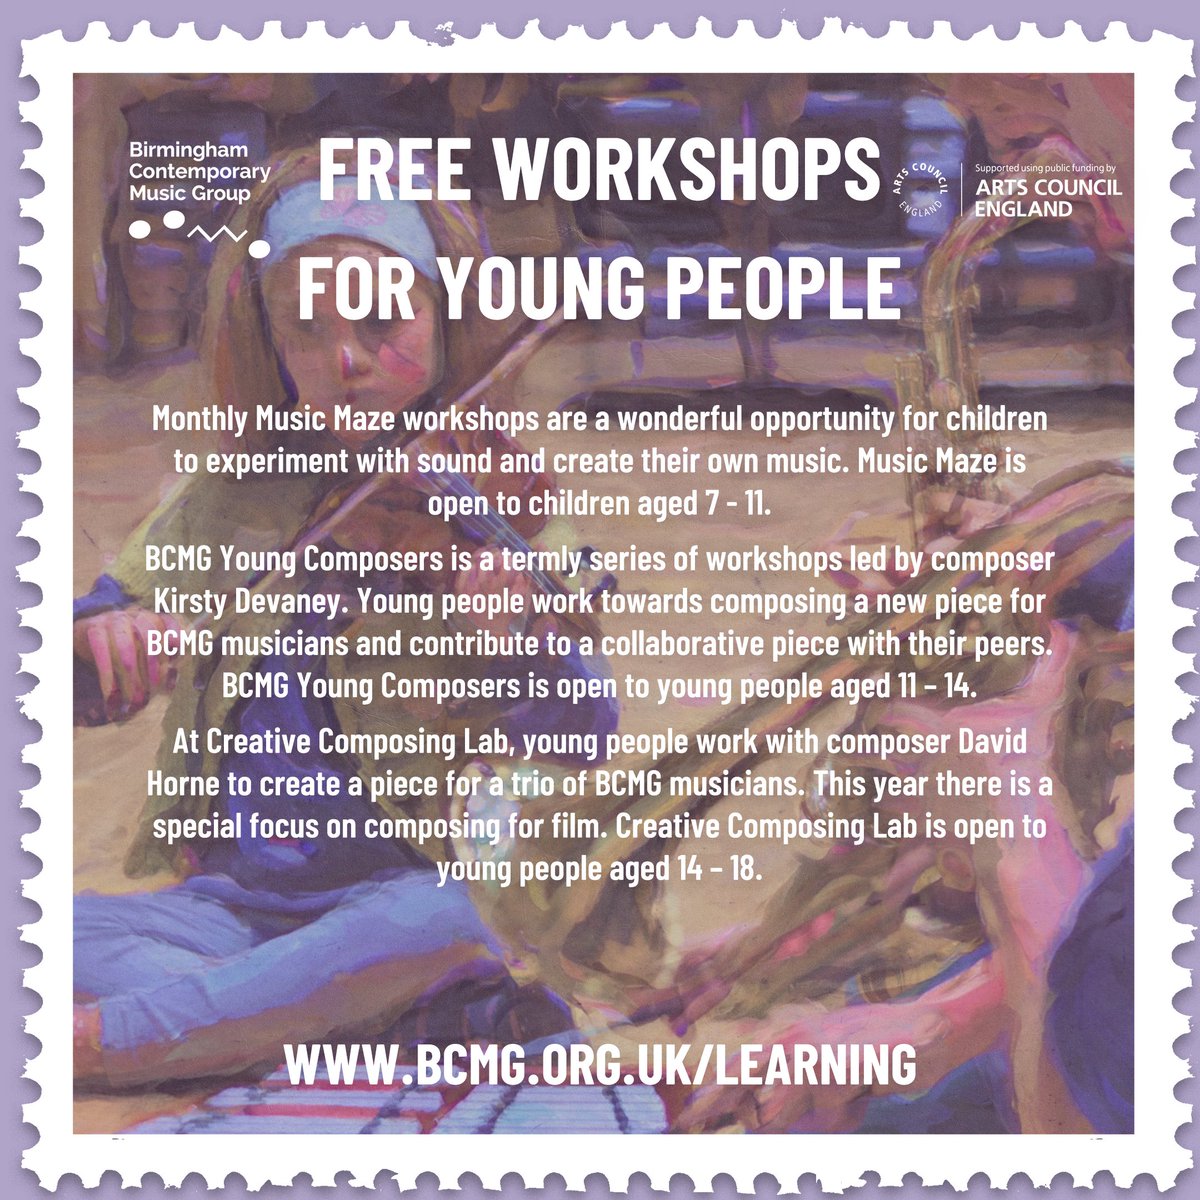 Our next season of music workshops for young people are now live 🎼 Get booking, whether you're a regular or just want to try something new with your budding musician! Book your places now 👉 bcmg.org.uk/learning